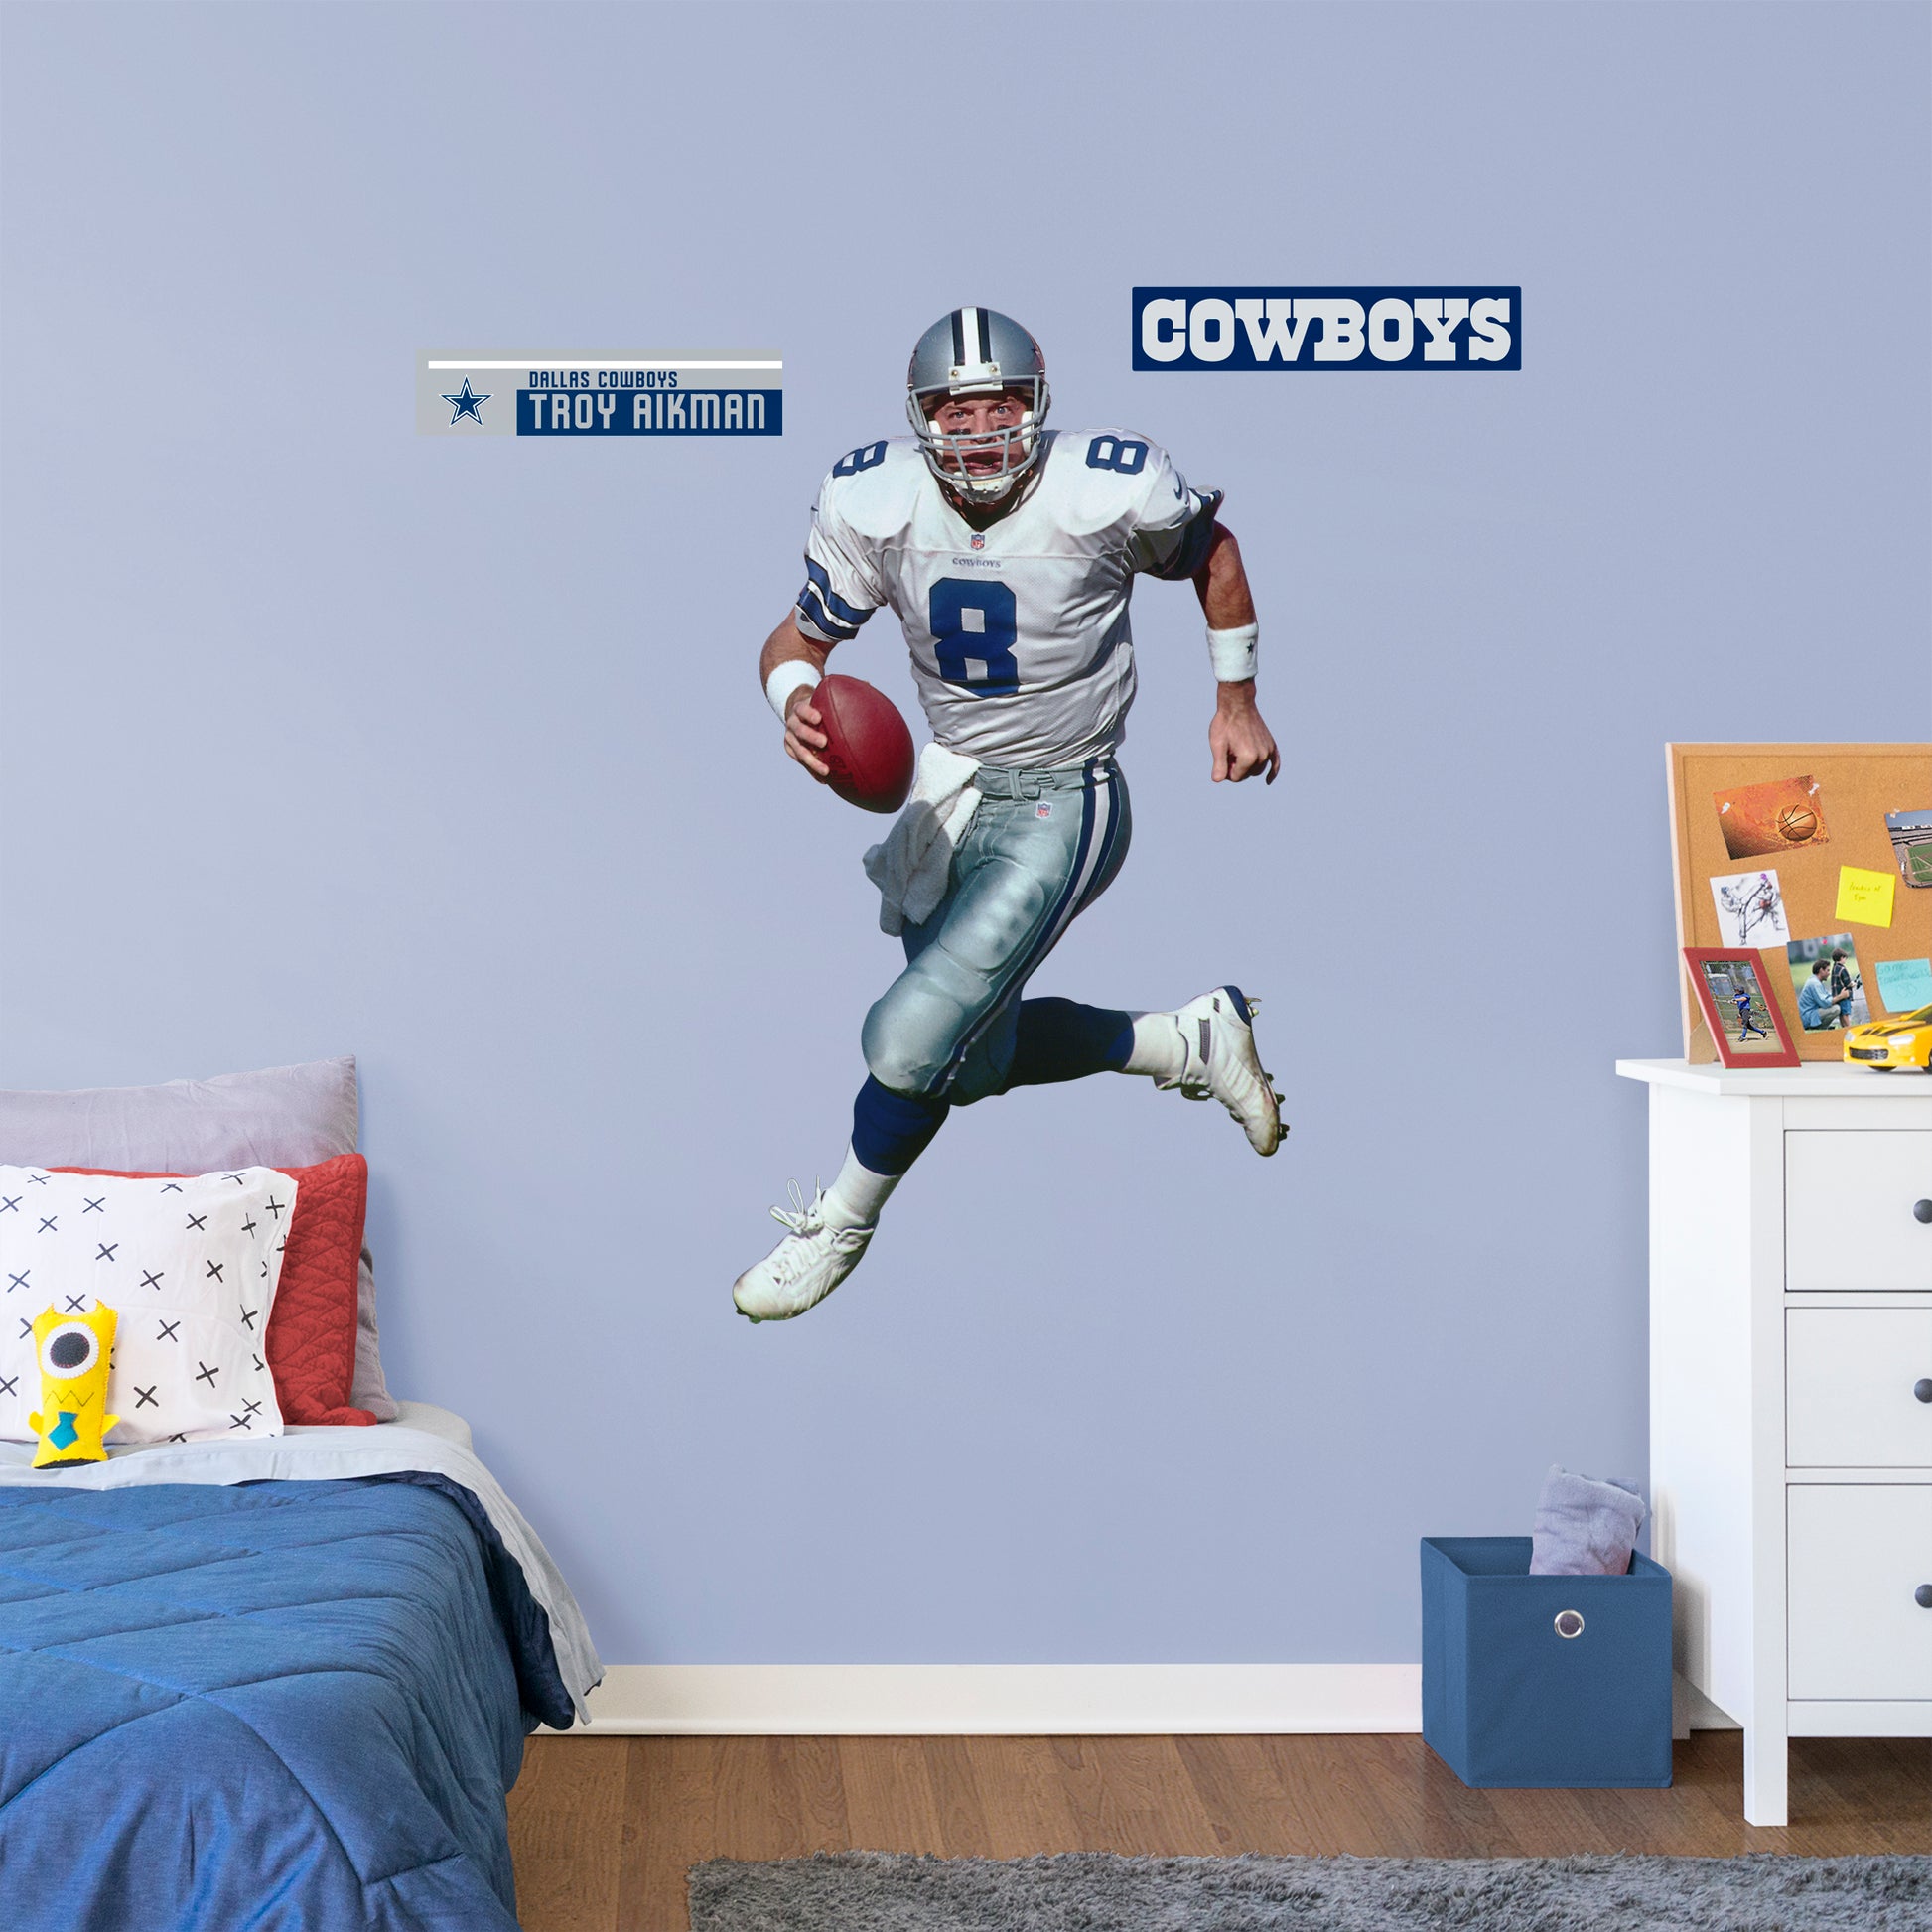 Giant Athlete + 2 Decals Quarterback with the Dallas Cowboys for 12 consecutive seasons and inducted in the Pro Football Hall of Fame in 2006, the IceMan can now be memorialized as one of the greats in your den or bedroom with this officially licensed NFL Troy Aikman: Legend removeable wall decal. Featuring the navy blue, metallic silver, royal blue, and white of America’s Team no flags will be called for this durable decal that ensures Aikman can be making passes for seasons to come.